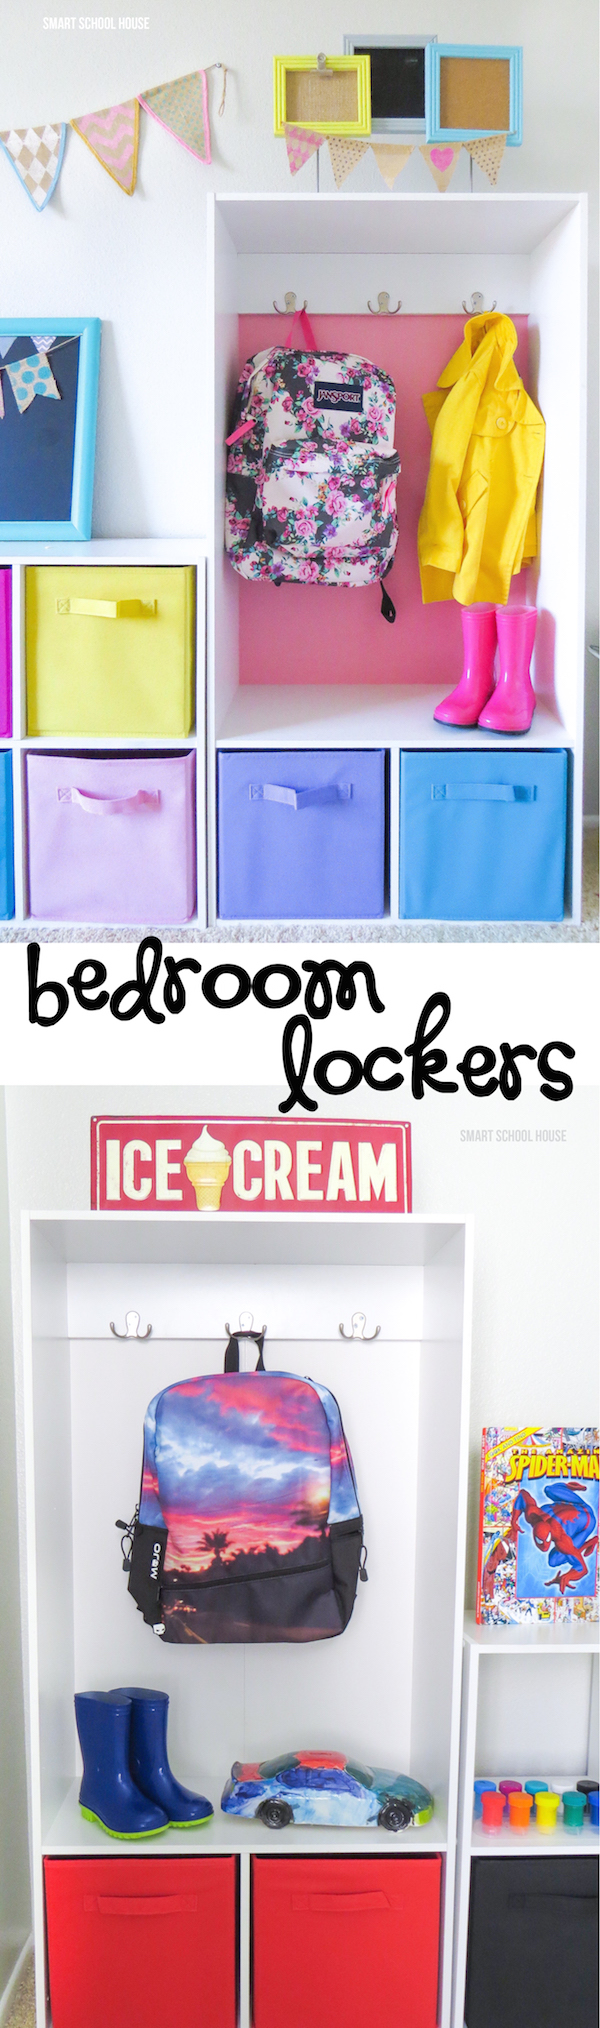 Bedroom Lockers for organizing kids backpacks, boots, umbrellas, and more. 